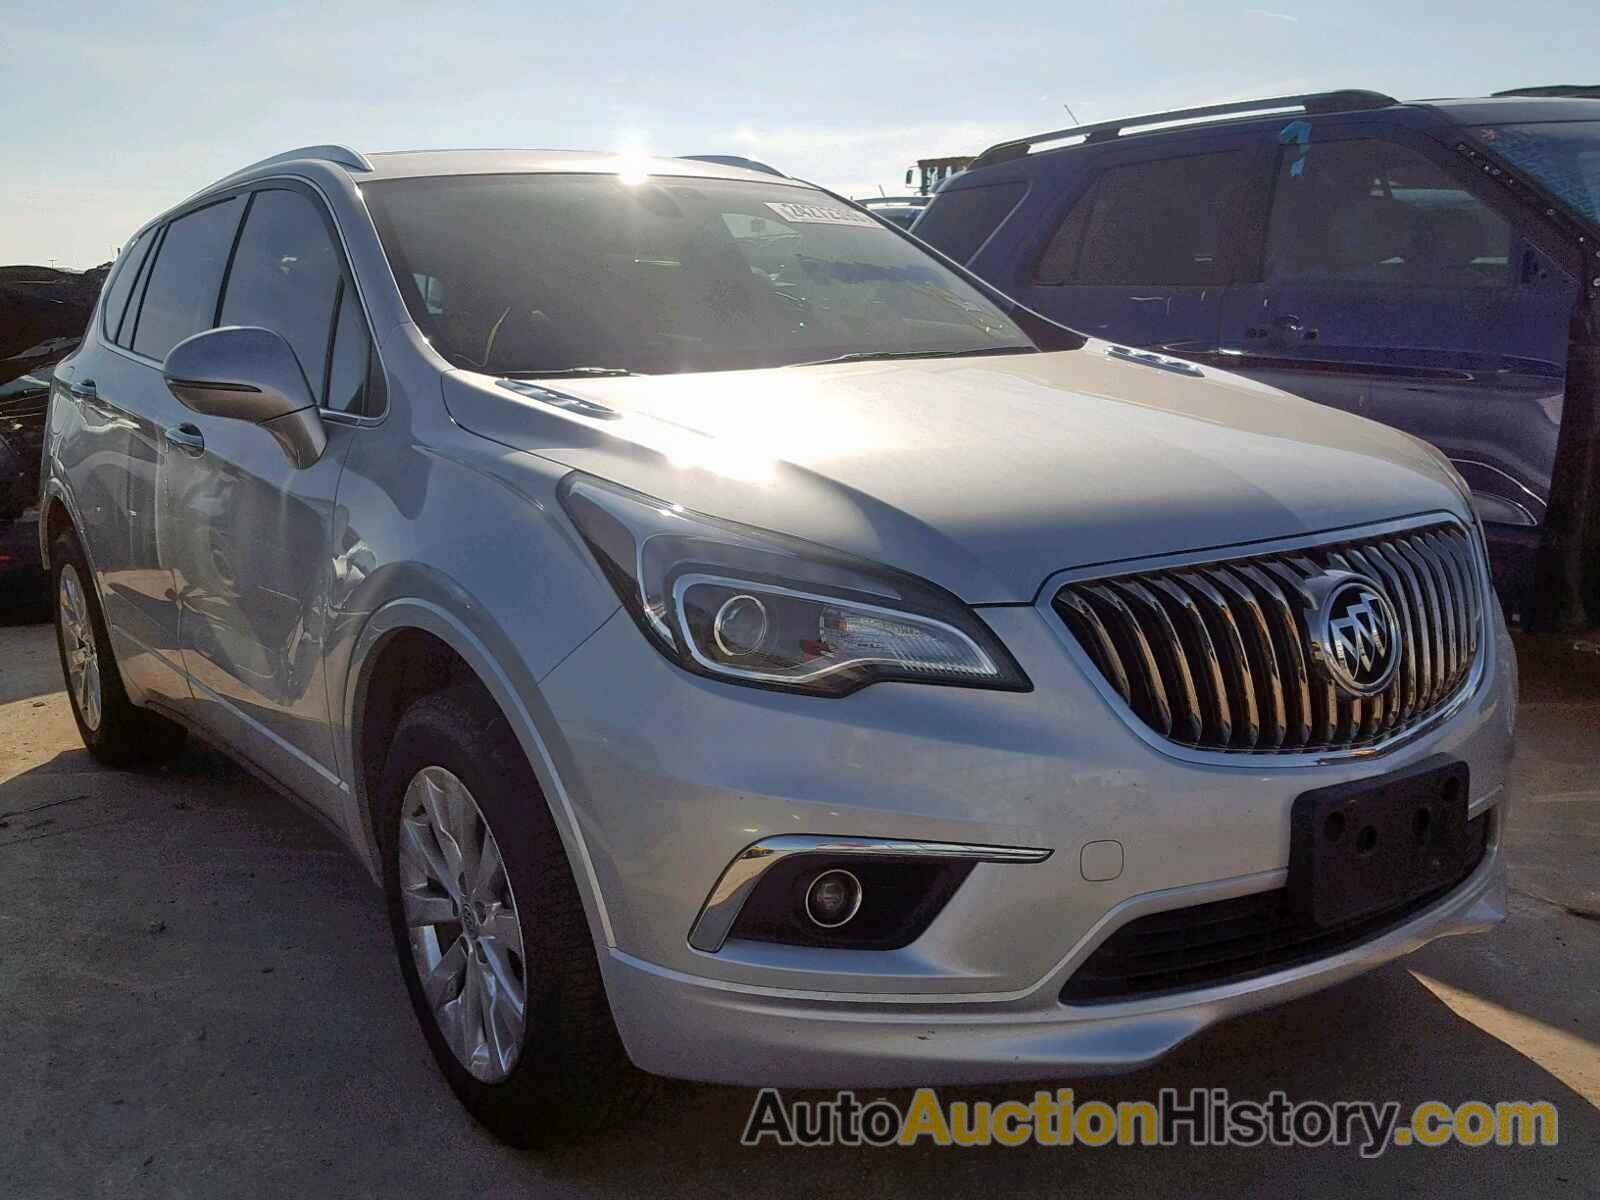 2017 BUICK ENVISION CONVENIENCE, LRBFXBSA8HD128870